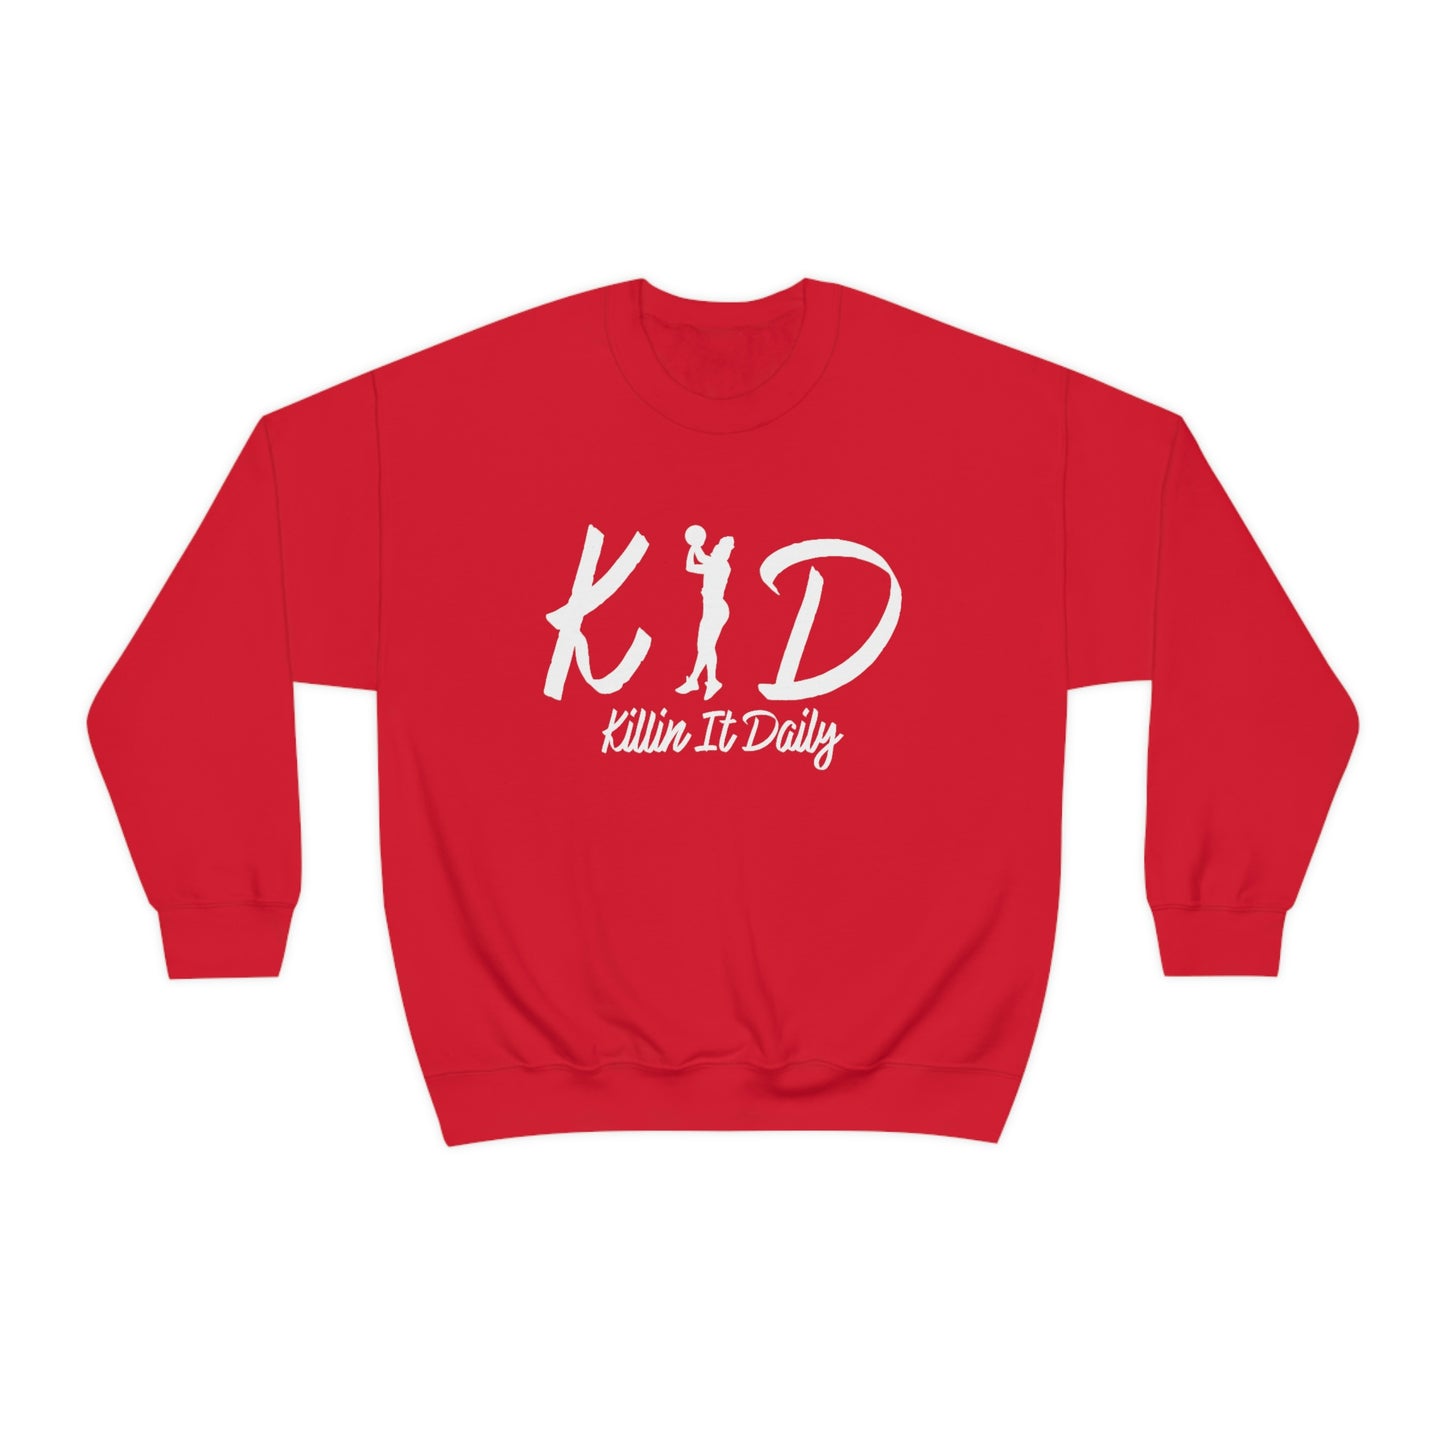 Kasey Kidwell: A Kid With a Dream Crewneck